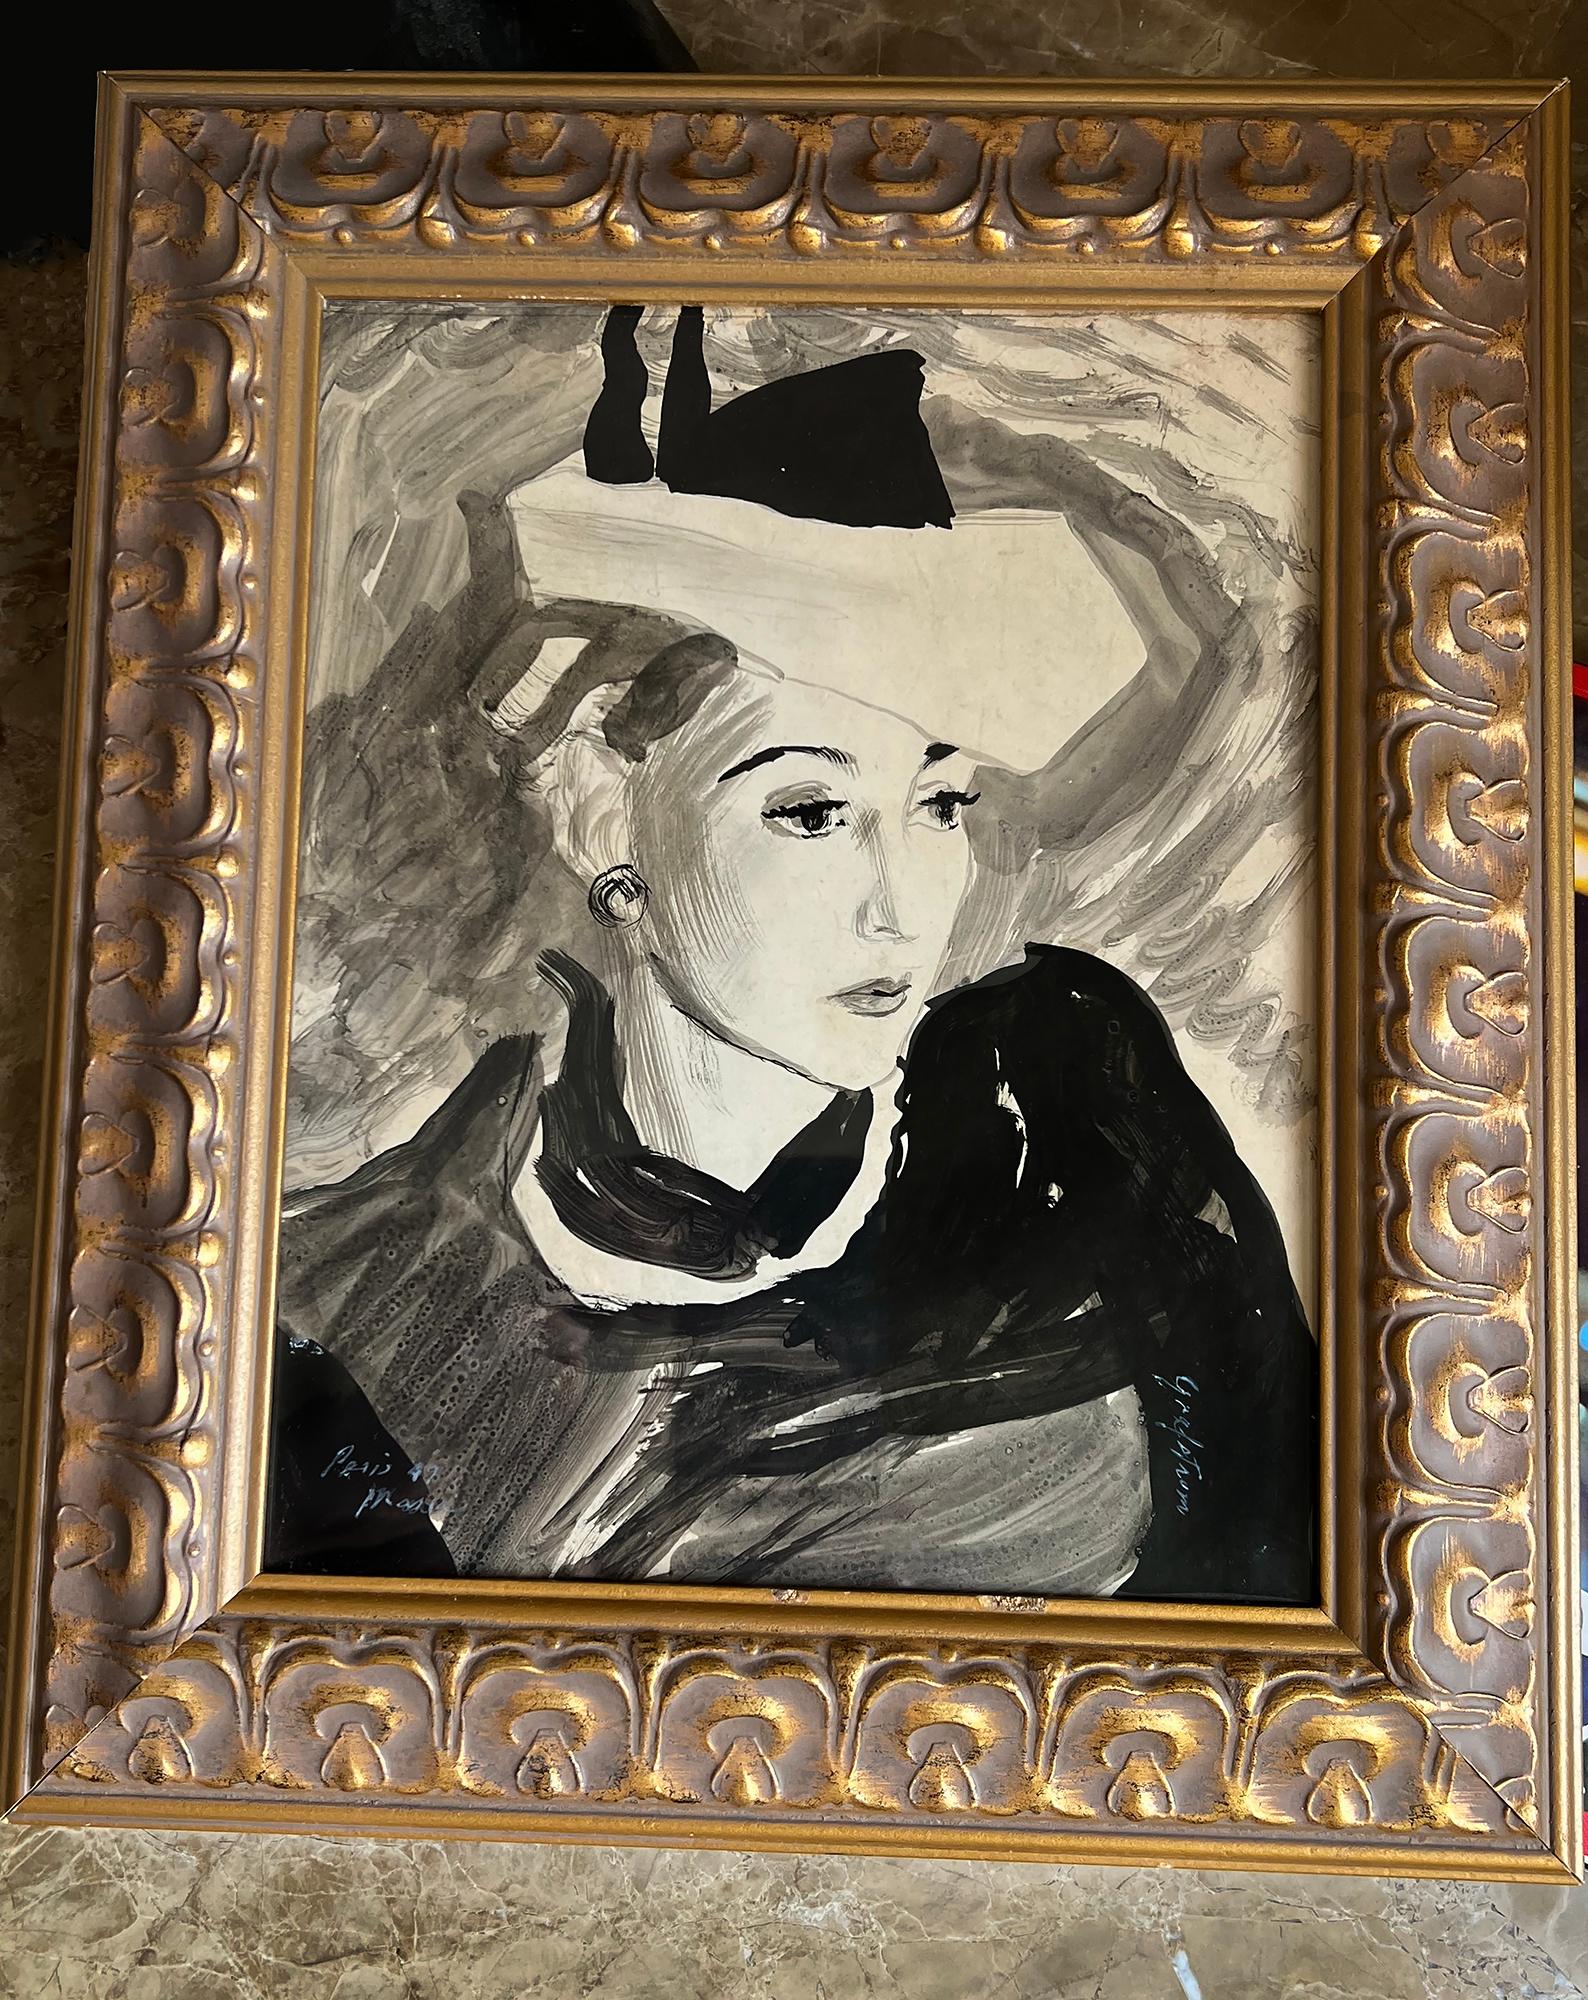 An elegantly rendered mid-century Parisian model with a stylish hat is masterfully rendered by American female illustrator Ruth Sigrid Grafstrom and signed lower right.  Inscribed and dated  Paris  1947 lower left.  Perhaps done for Vogue Magazine?